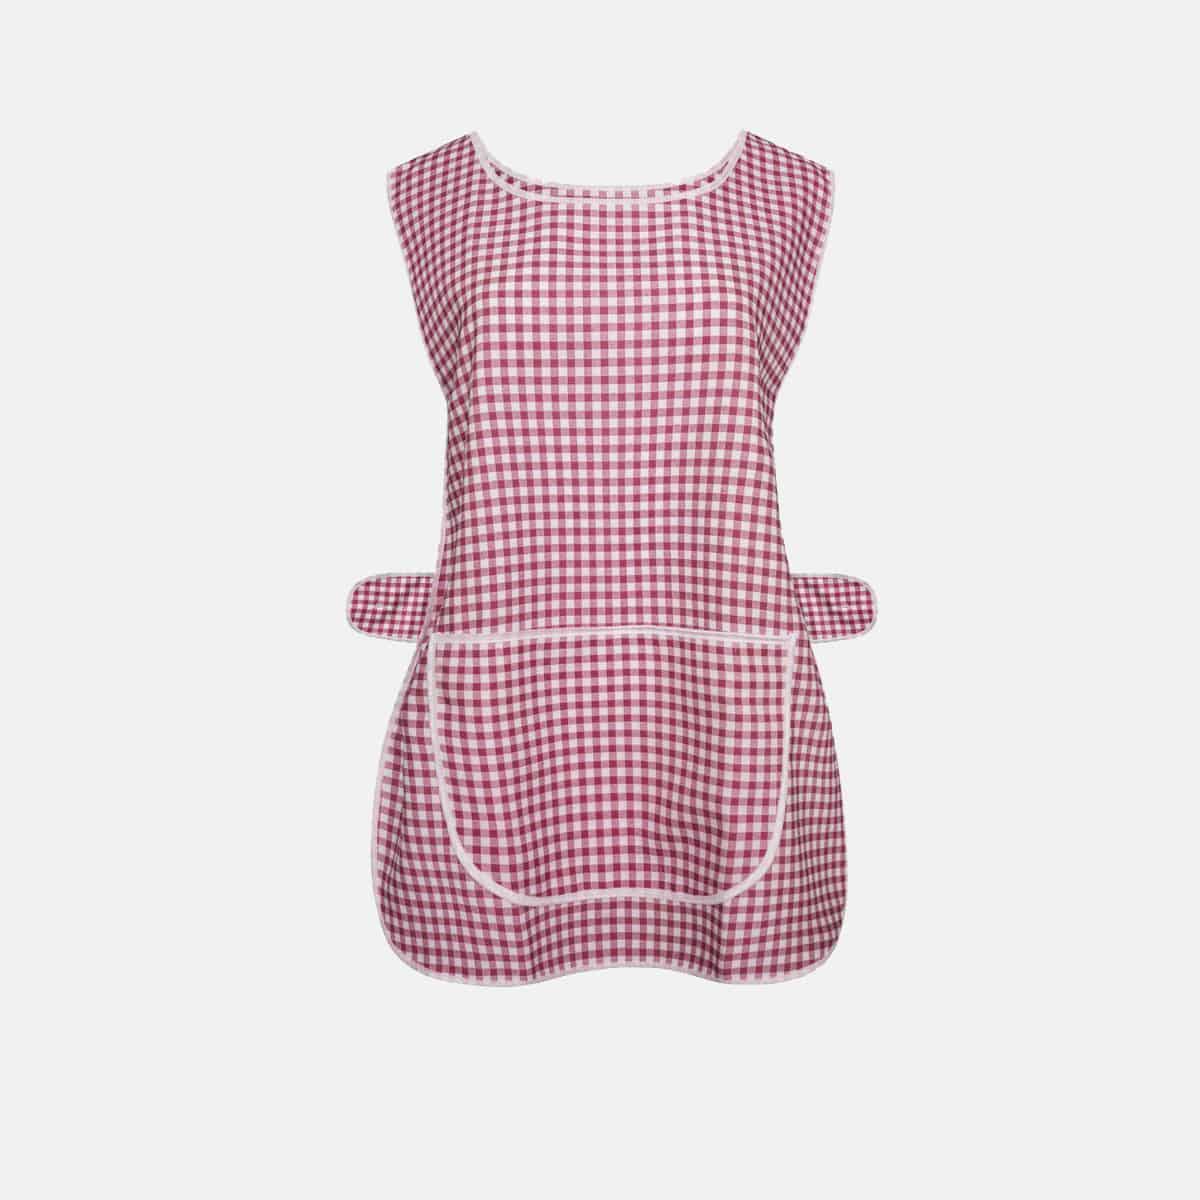 Ladies Check Design Overall Front Pocket Kitchen Cooking Cleaning Tabards